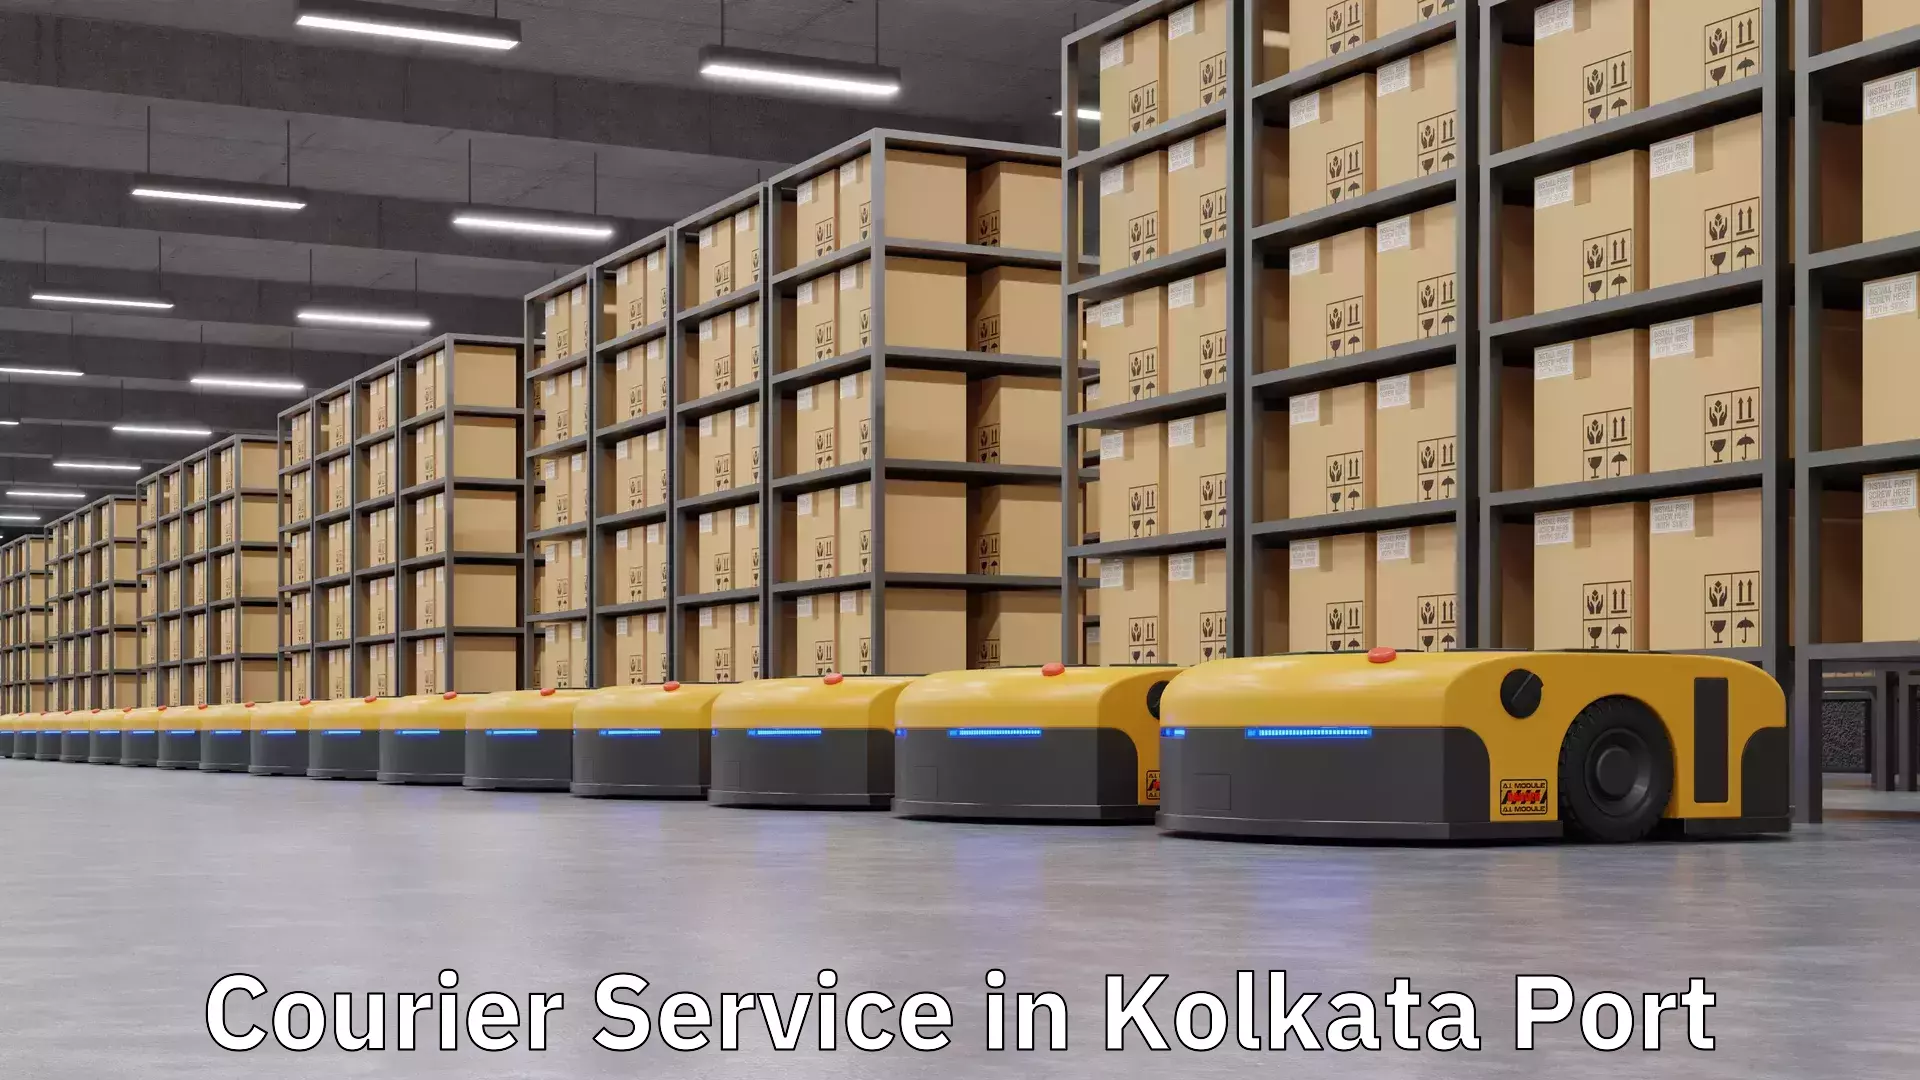 Local courier options in Kolkata Port